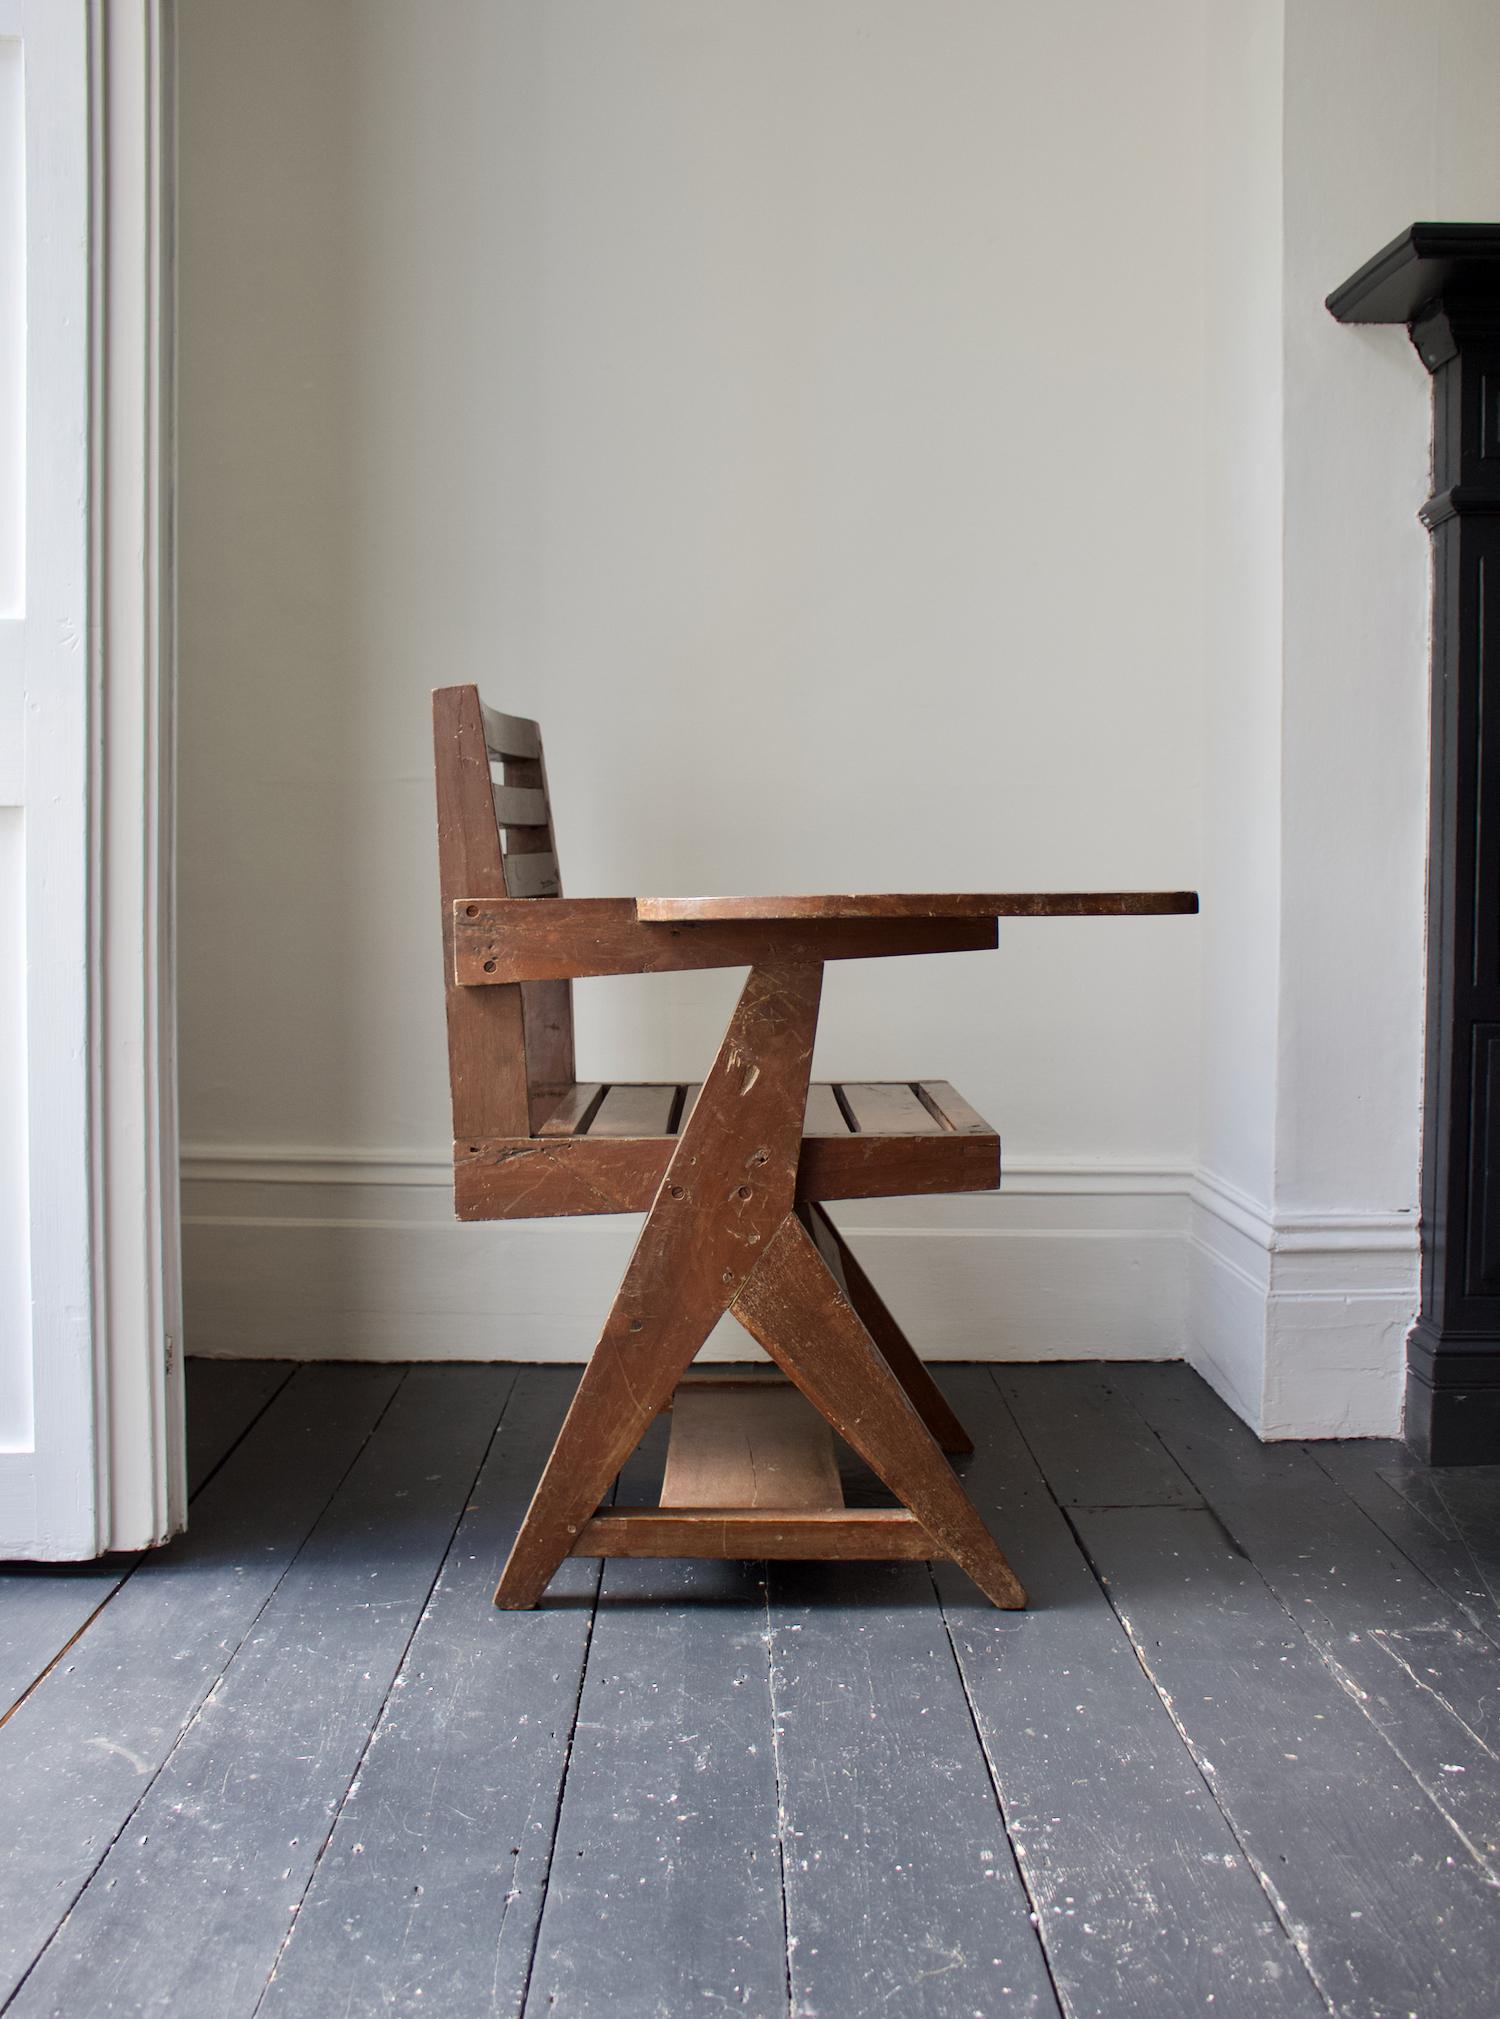 Paddle arm student chair or writing chair attributed to Pierre Jeanneret (1896-1967). 

This all-wood model has an inverted Y leg supporting the fixed writing area and a shelf below the seat. 

A heavy sculptural piece with an aged patina